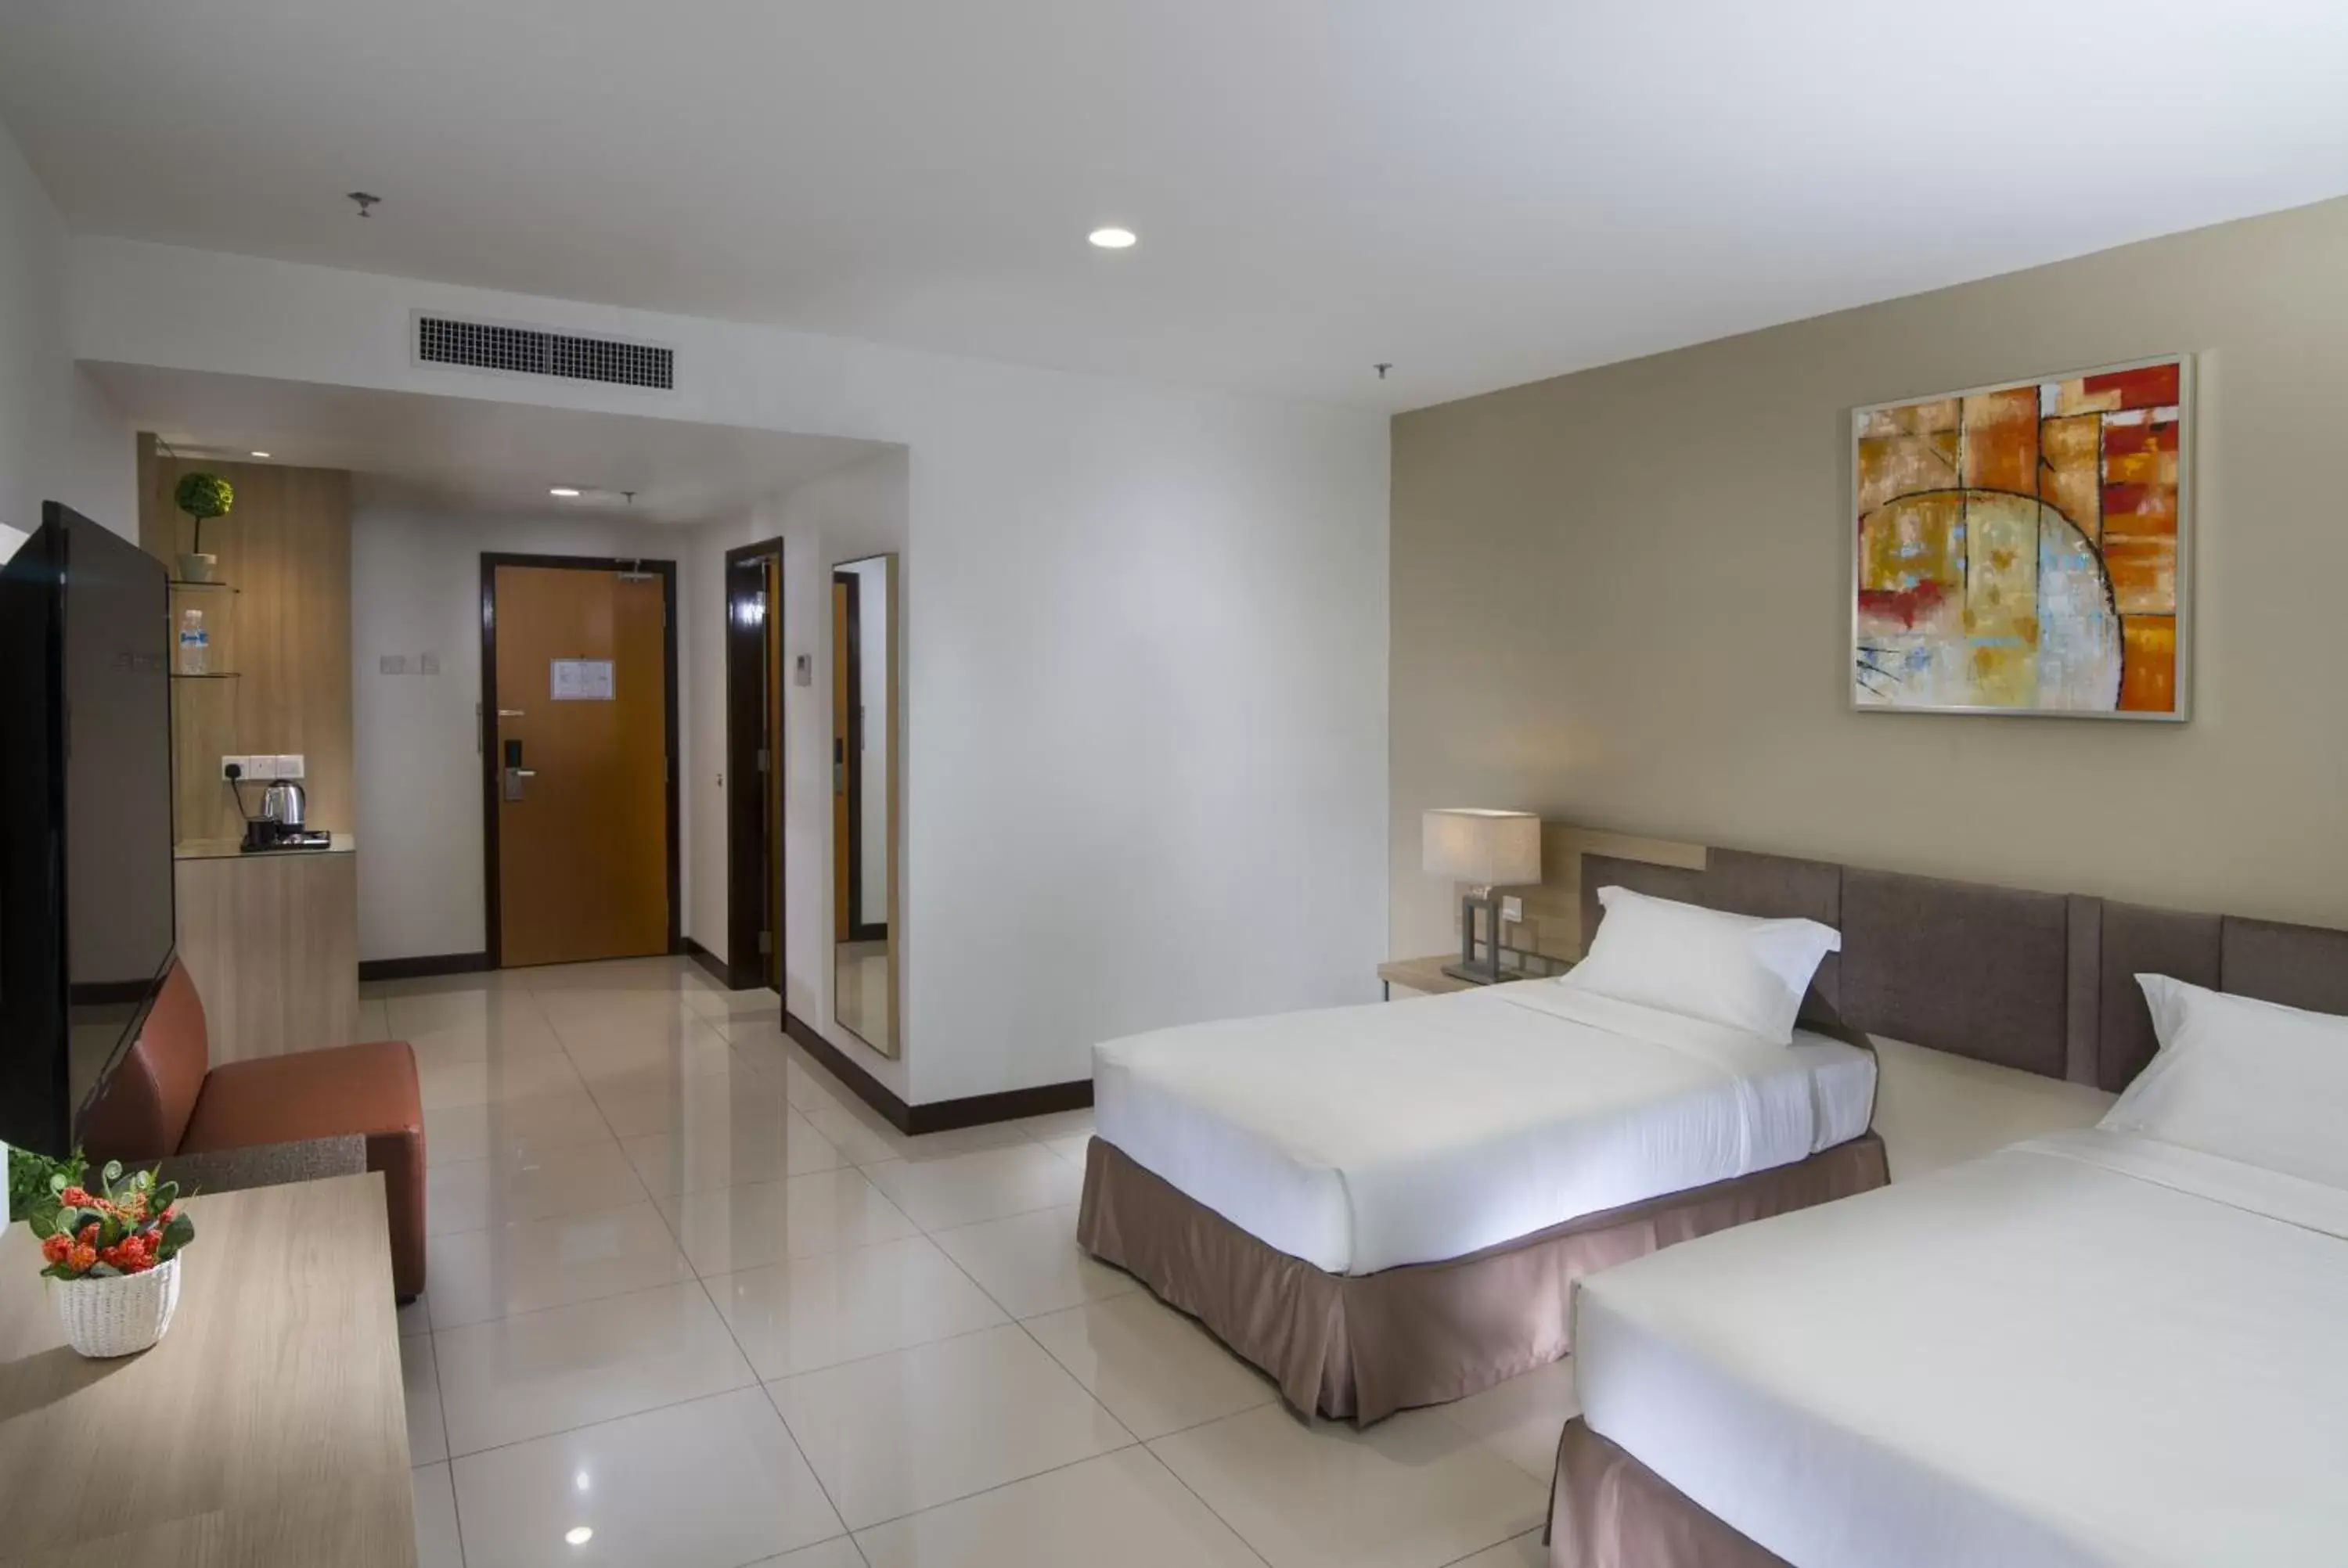 Bed, Room Photo in One Pacific Hotel and Serviced Apartments